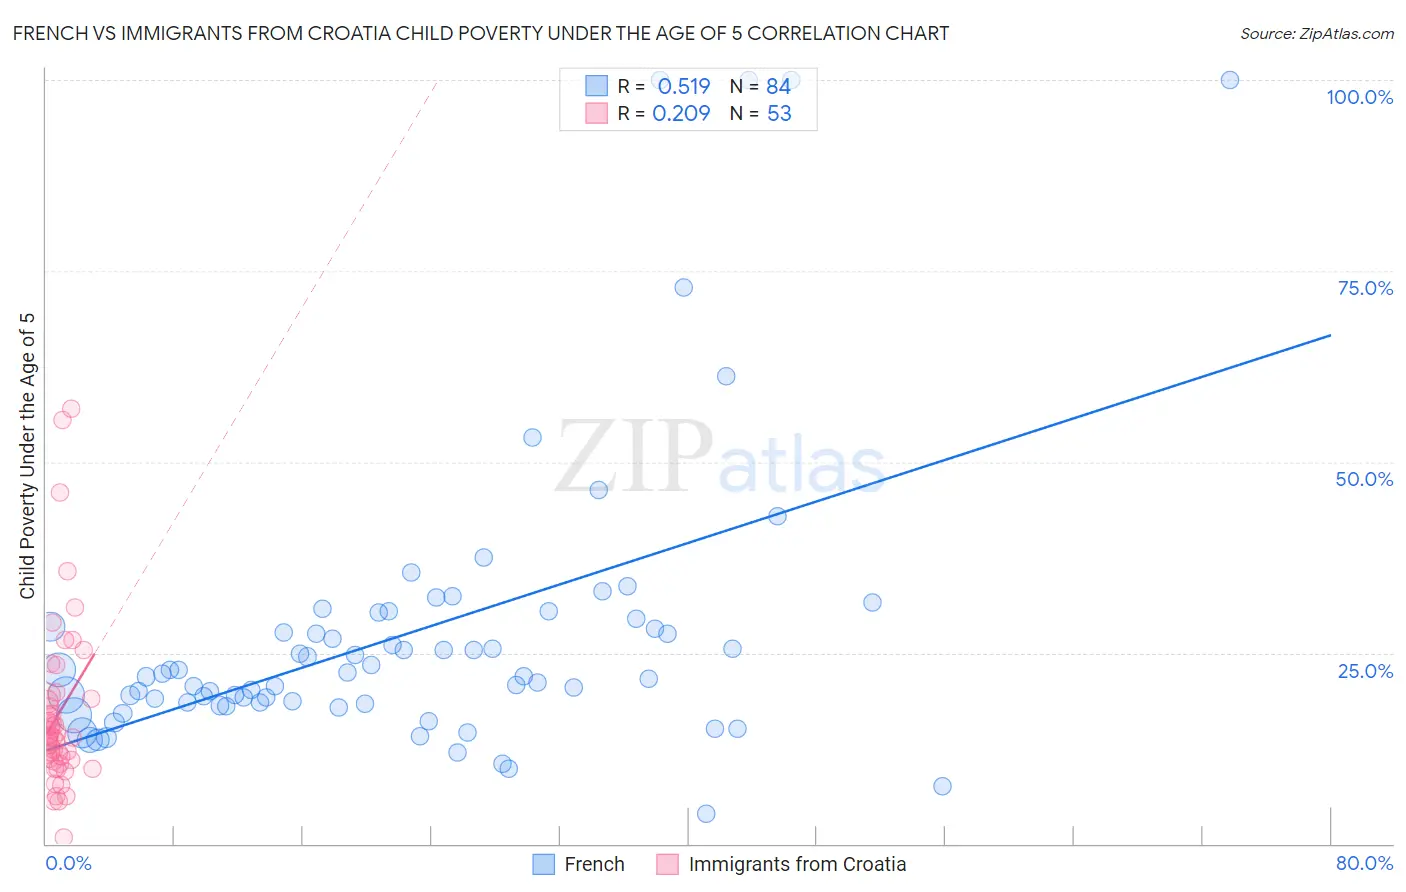 French vs Immigrants from Croatia Child Poverty Under the Age of 5